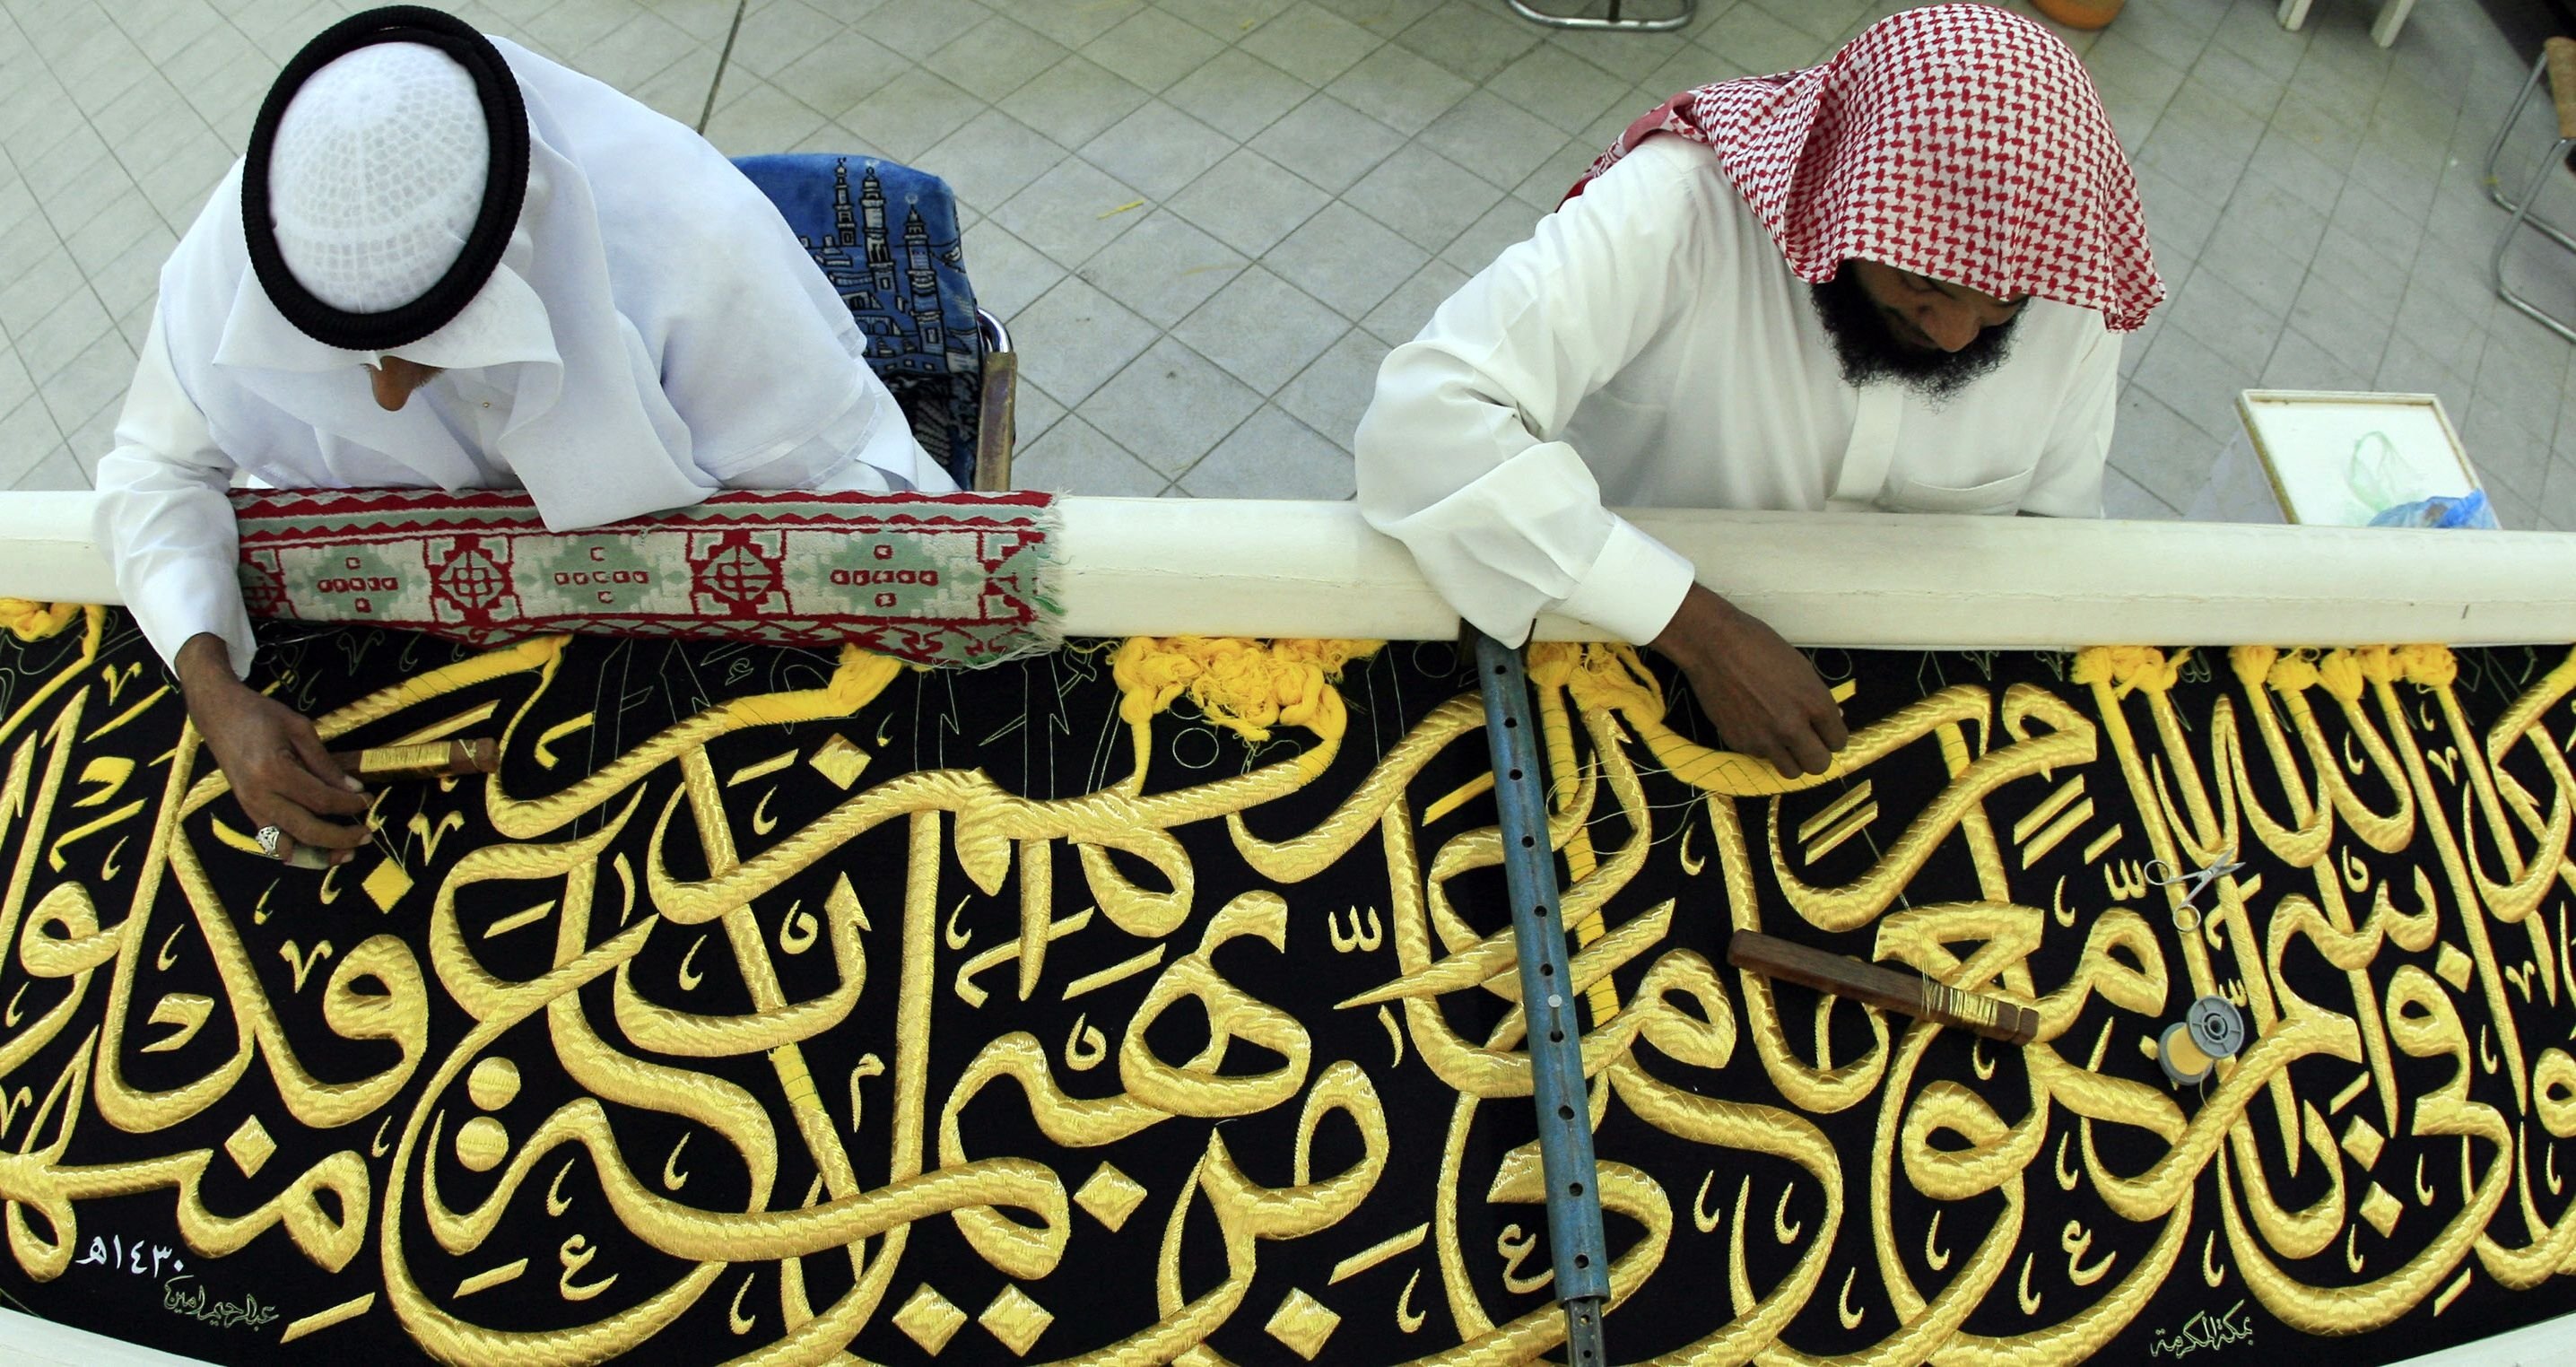 Workers sew Islamic Arabic calligraphy in gold thread on a drape to cover the Kaaba at the Kiswa factory in the holy city of Mecca, Saudi Arabia, Nov. 29, 2008. (AFP)